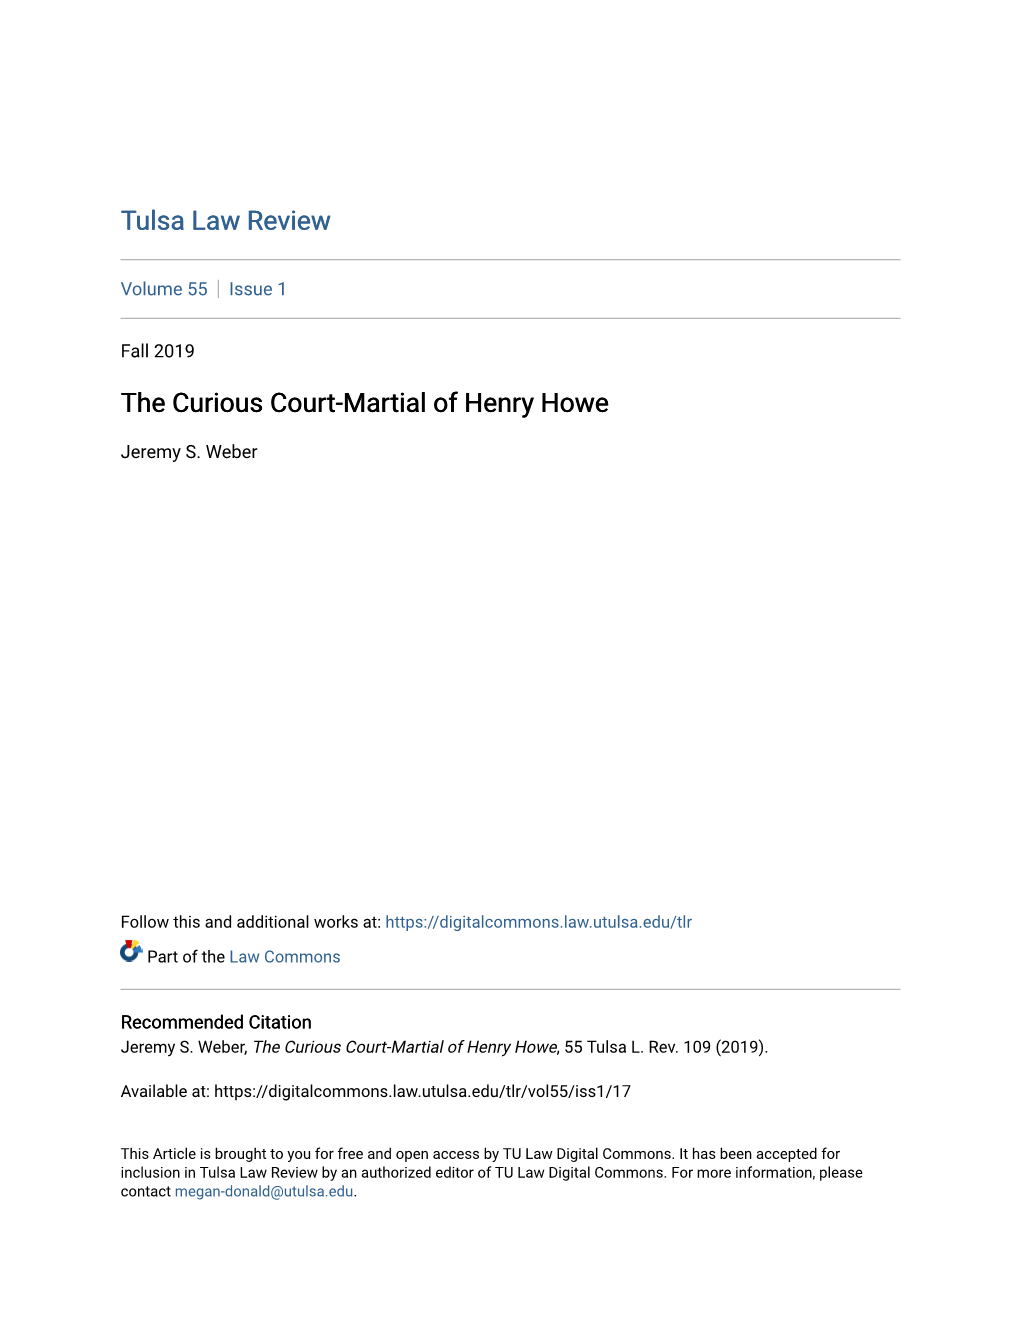 The Curious Court-Martial of Henry Howe